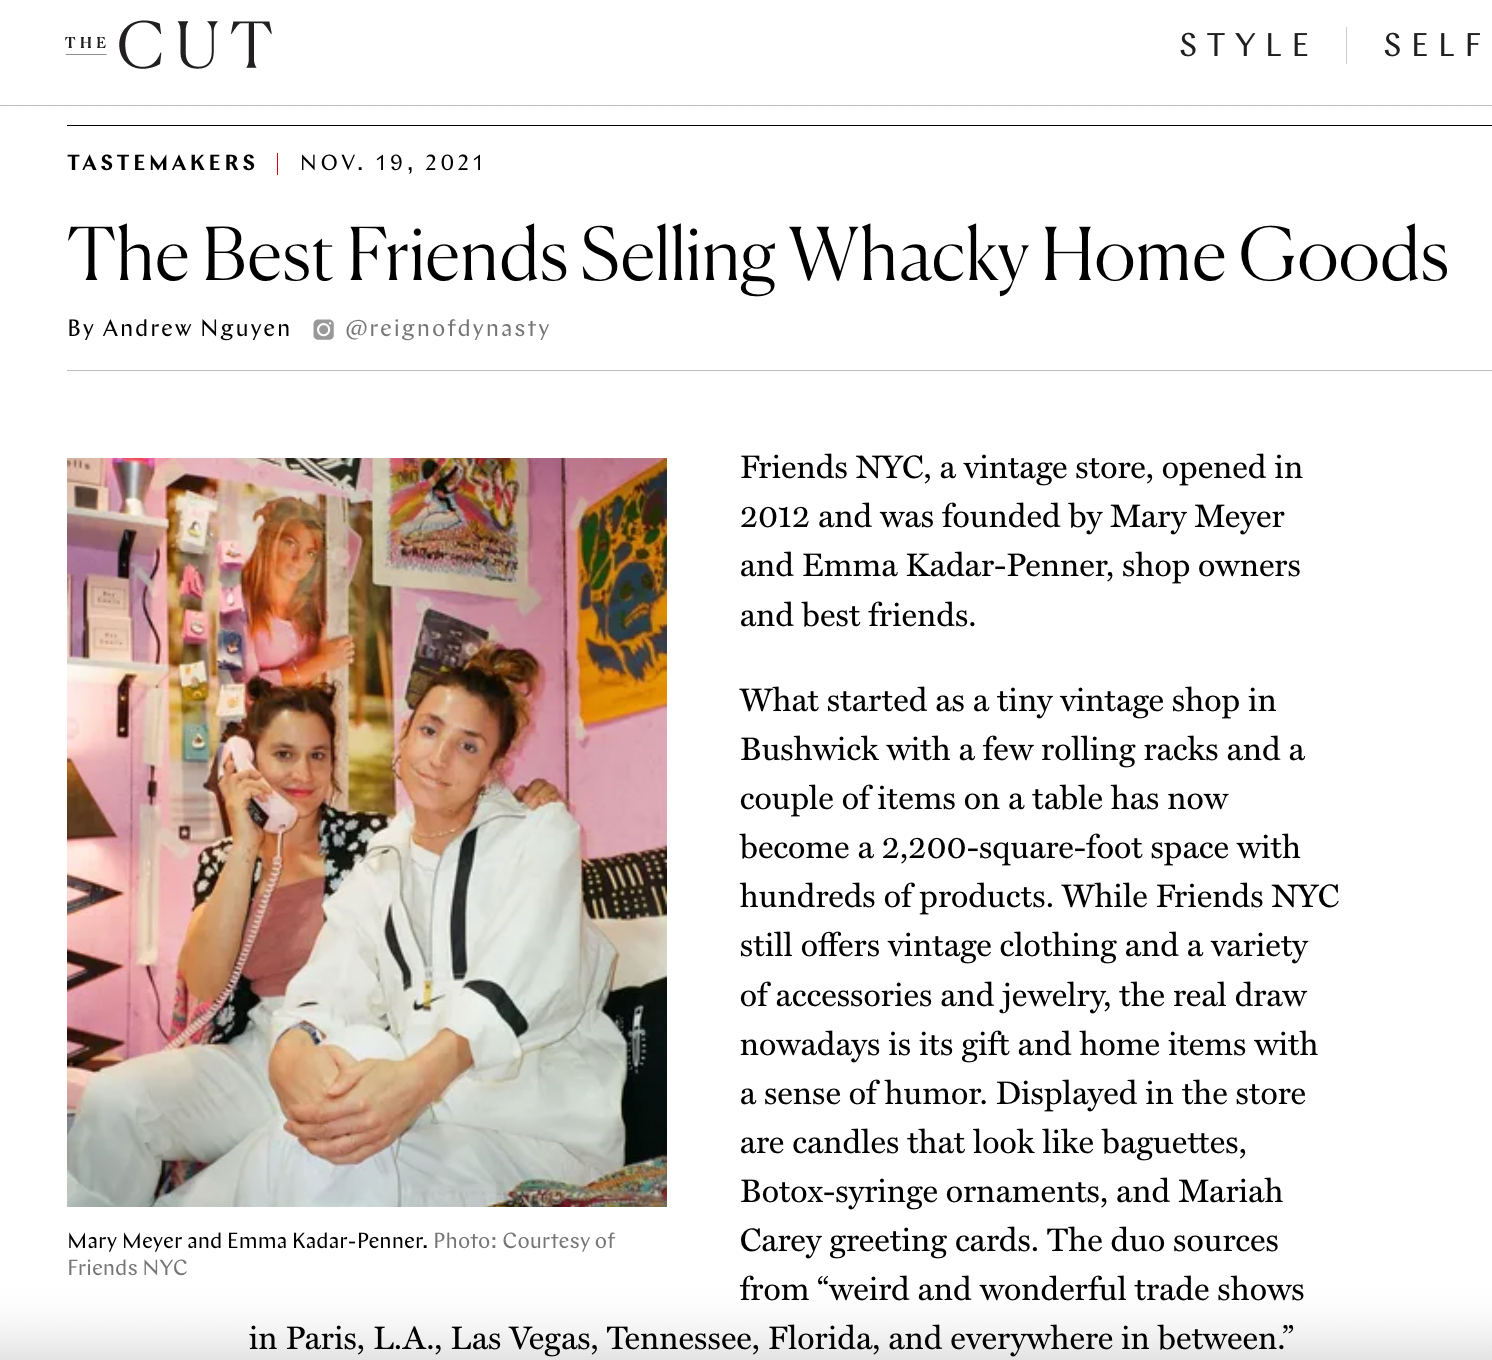 the cut tastemakers The Best Friends Selling Whacky Home Goods friends nyc